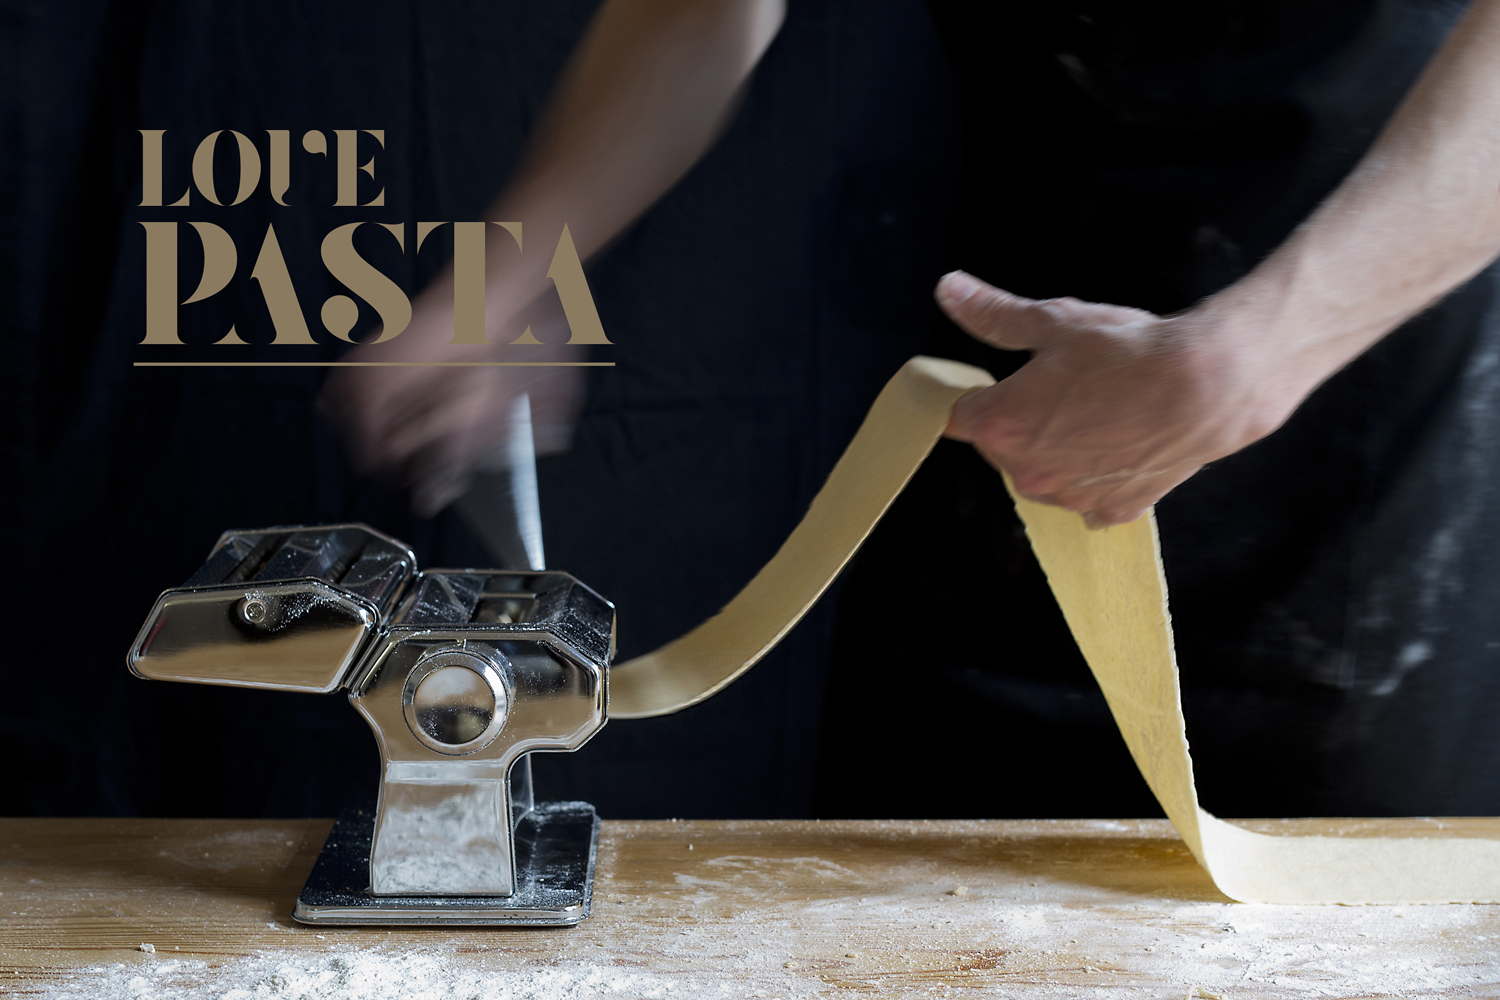 Making pasta, food photography Liverpool, Manchester, Chester, Foodie